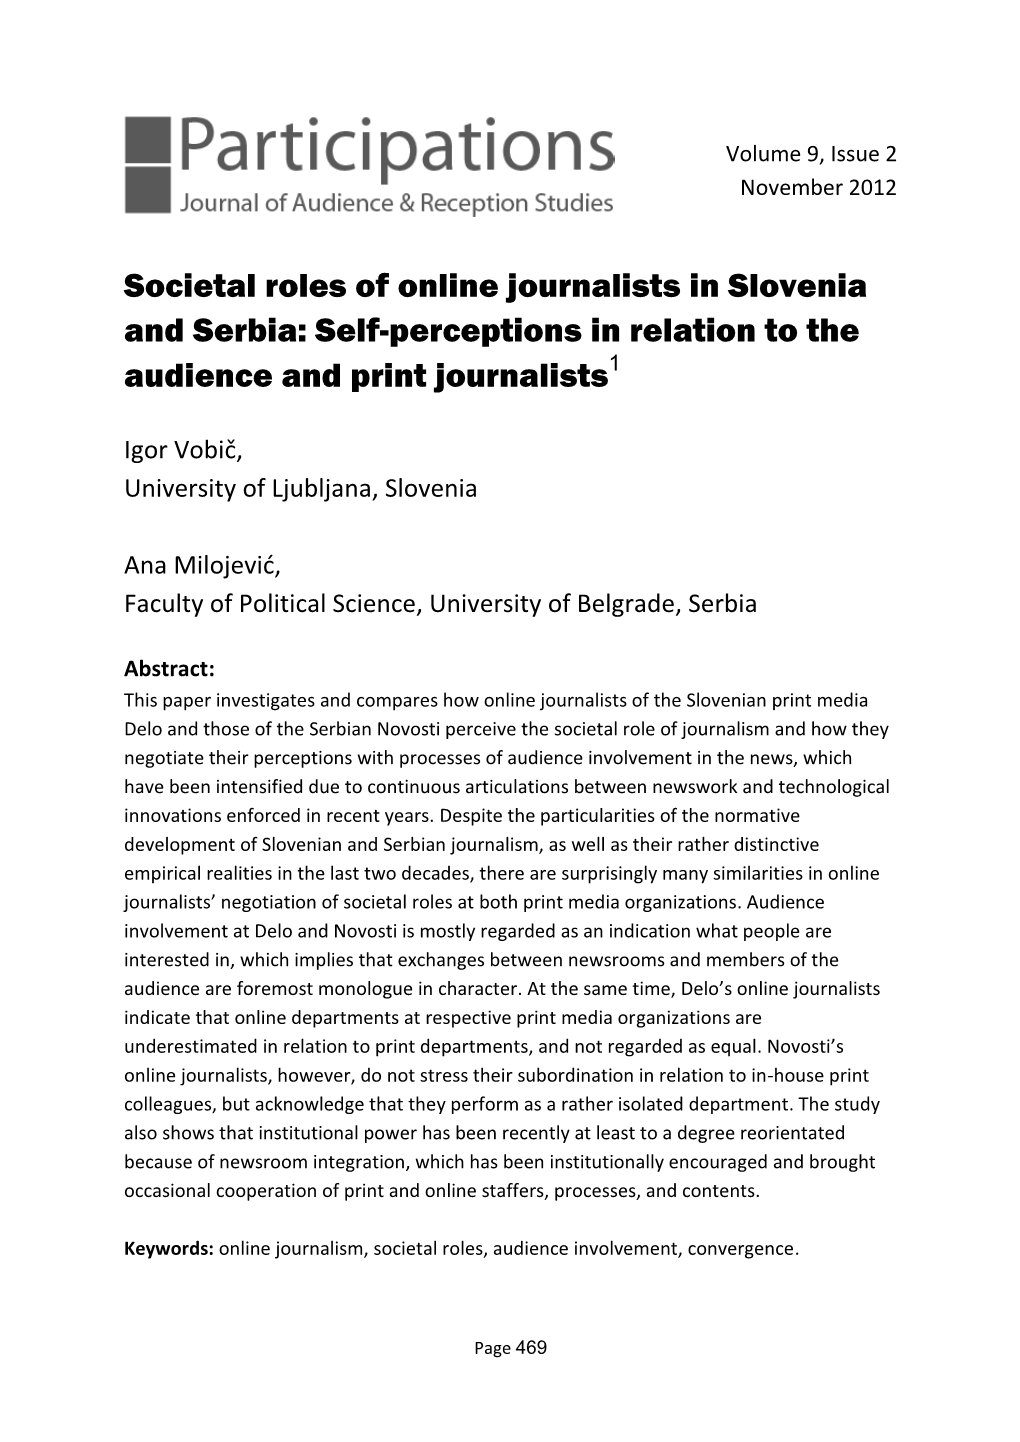 Societal Roles of Online Journalists in Slovenia and Serbia: Self-Perceptions in Relation to the Audience and Print Journalists1